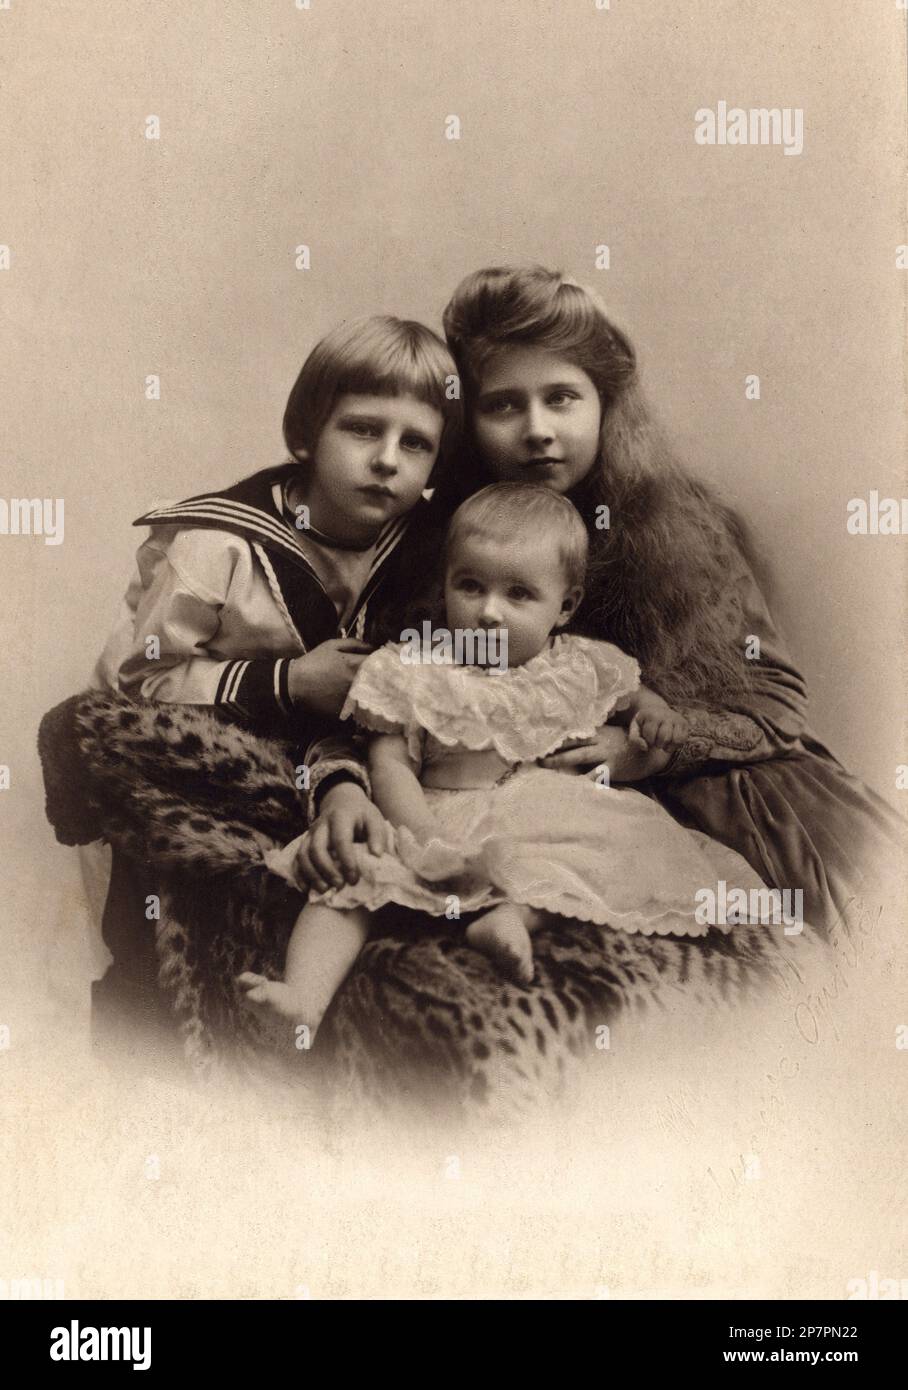 1910 c, ROMANIA : The prince NICOLAE von Hohenzollern Brana ( Nicky , Nicola , Nicholas , 1903 - 1978 ) , future Prince Regent of Romania from 1927 to 1930 ( at place of his nefew King Mihai - Michael son of his brother Carol II ), with young brothers : MARIA ( Mignon , 1900 - 1978 , married with King of Yugoslavia Aleksandar I ) and ILEANA ( Jleana , 1909 - 1991,  in 1931,  married the Habsburg of Tuscany Archduke Anton of Austria 1909 - 1991 ). Sons of King FERDINAND I ( Nando ) ( 1865 - 1927 ), King from 1914 to 1927, married with  Queen MARIA ( Mary ) of Romania princess of Great Britain a Stock Photo